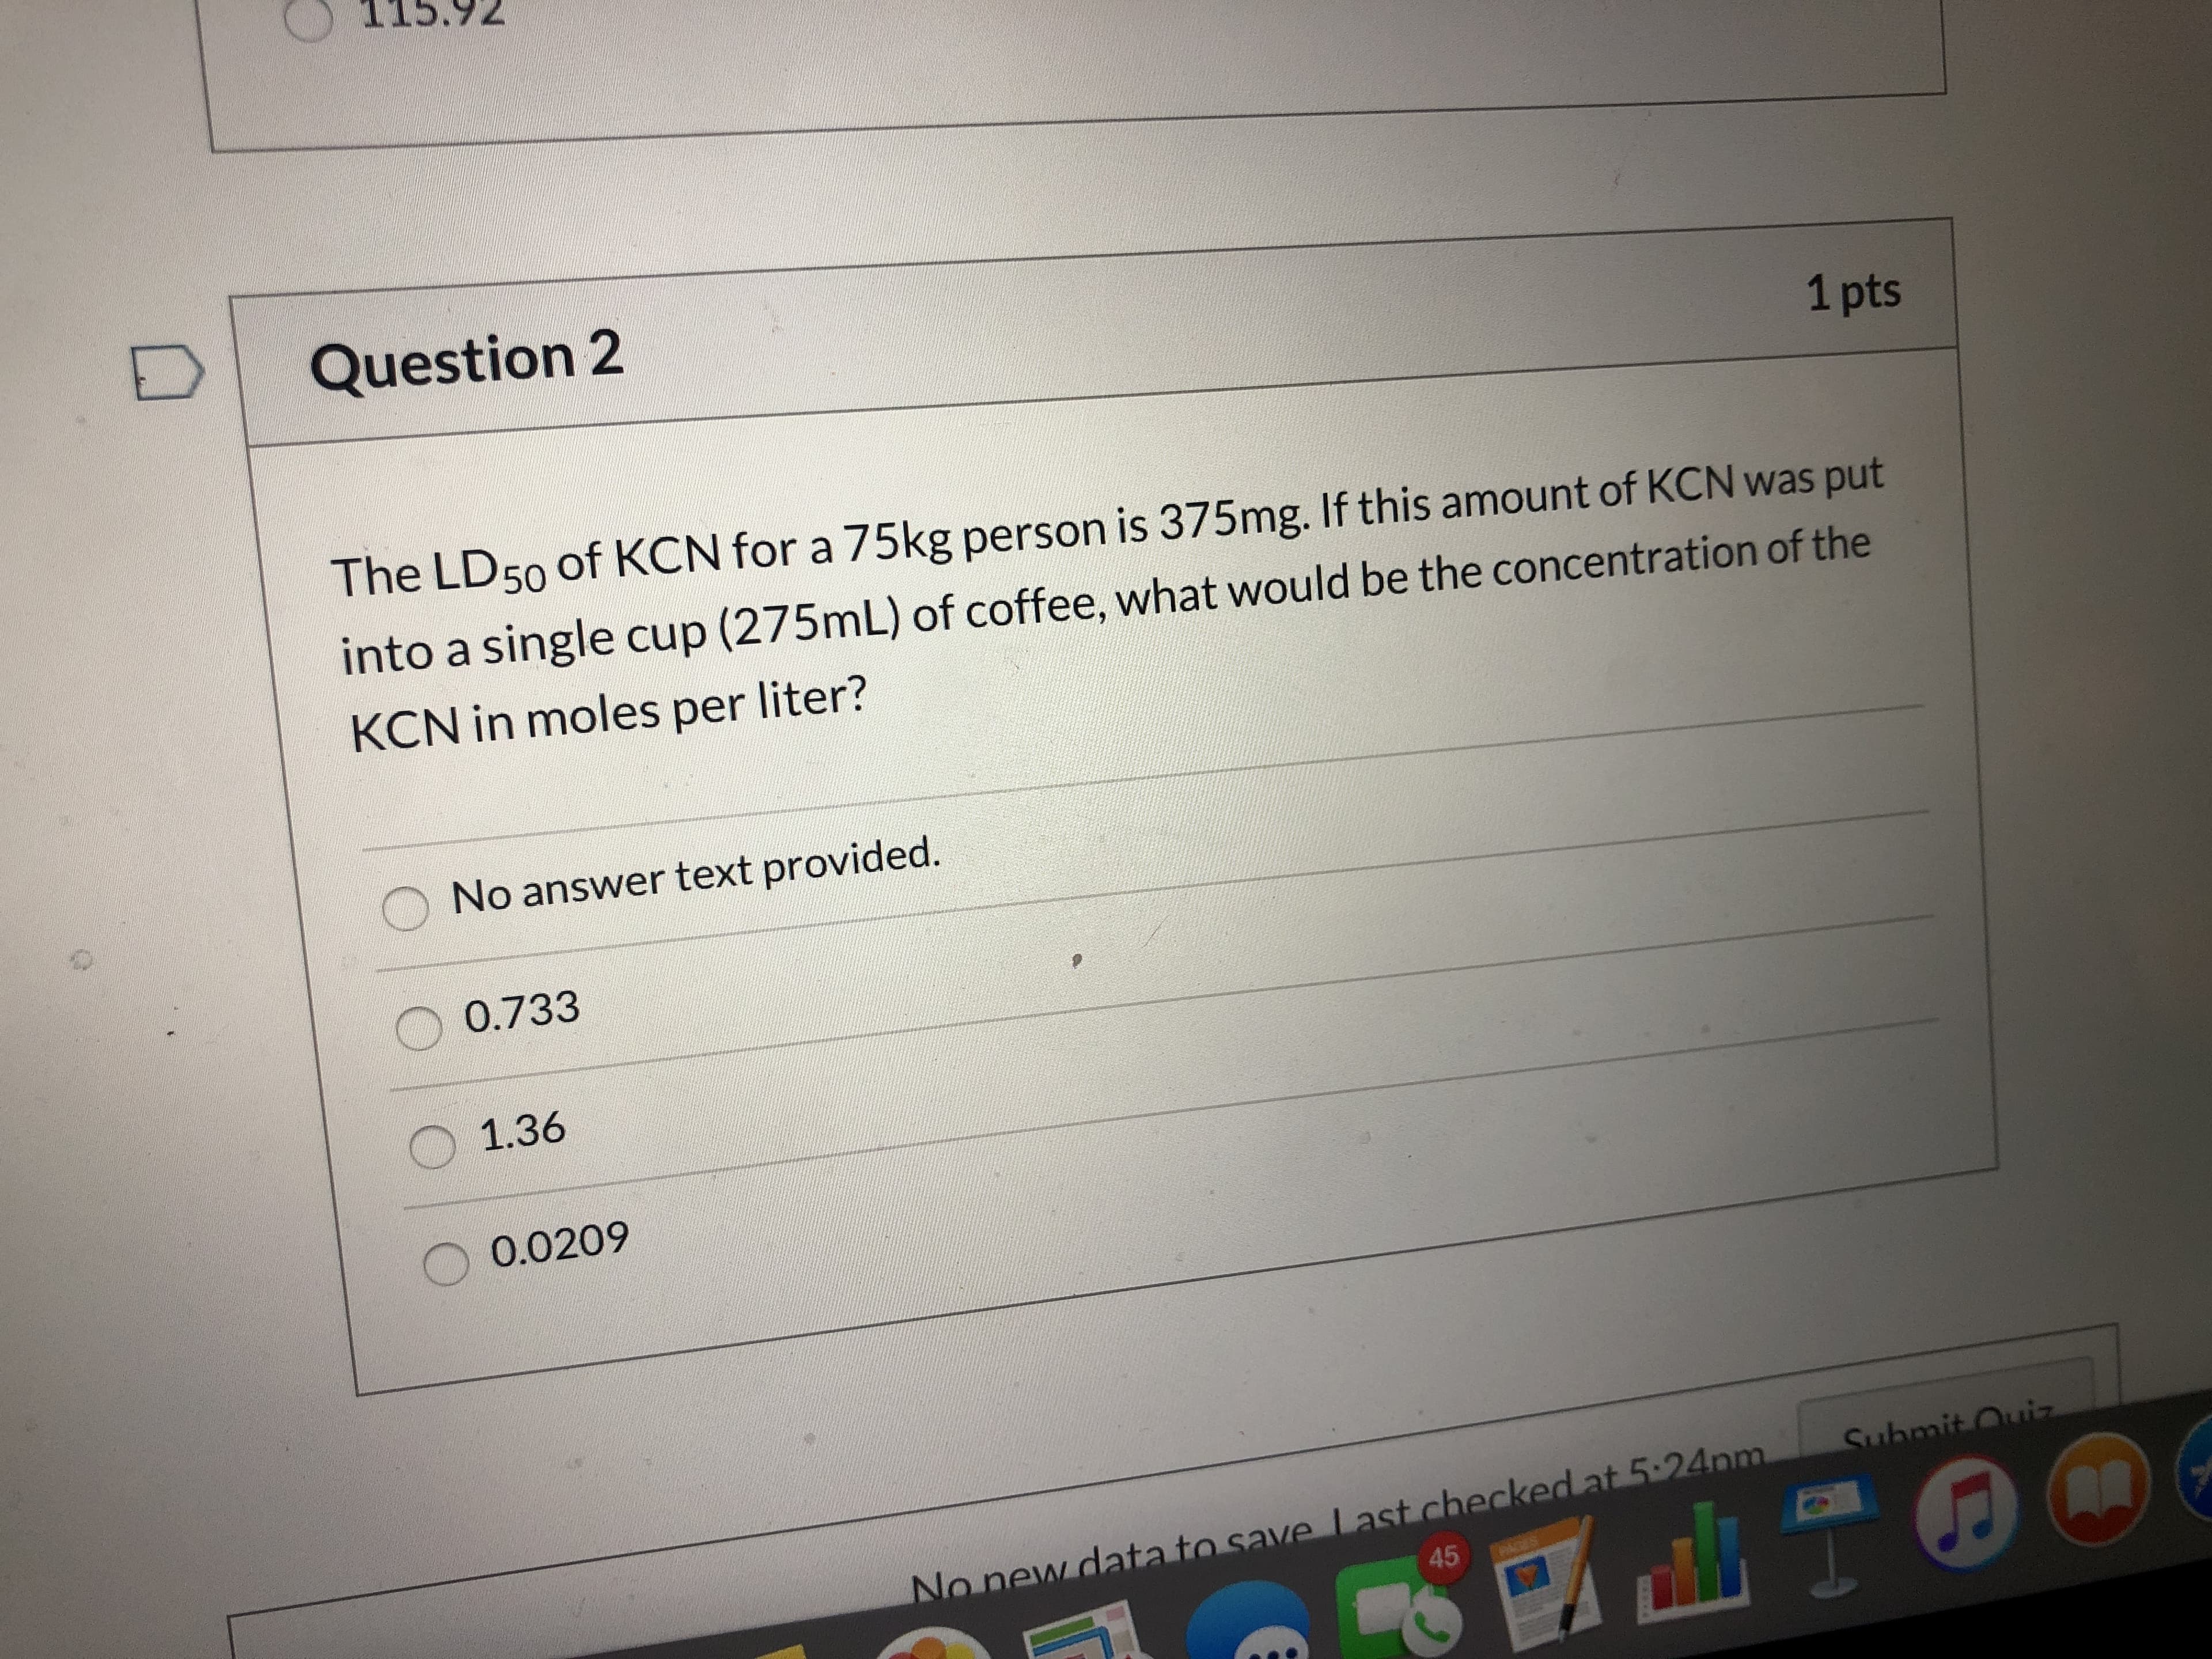 5.92
Question 2
1 pts
The LD50 of KCN for a 75kg person is 375mg. If this amount of KCN was put
into a single cup (275mL) of coffee, what would be the concentration of the
KCN in moles per liter?
No answer text provided.
0.733
1.36
0.0209
Submit Ouiz
No new data to save Last checked at 5:24pm
45
AGES
